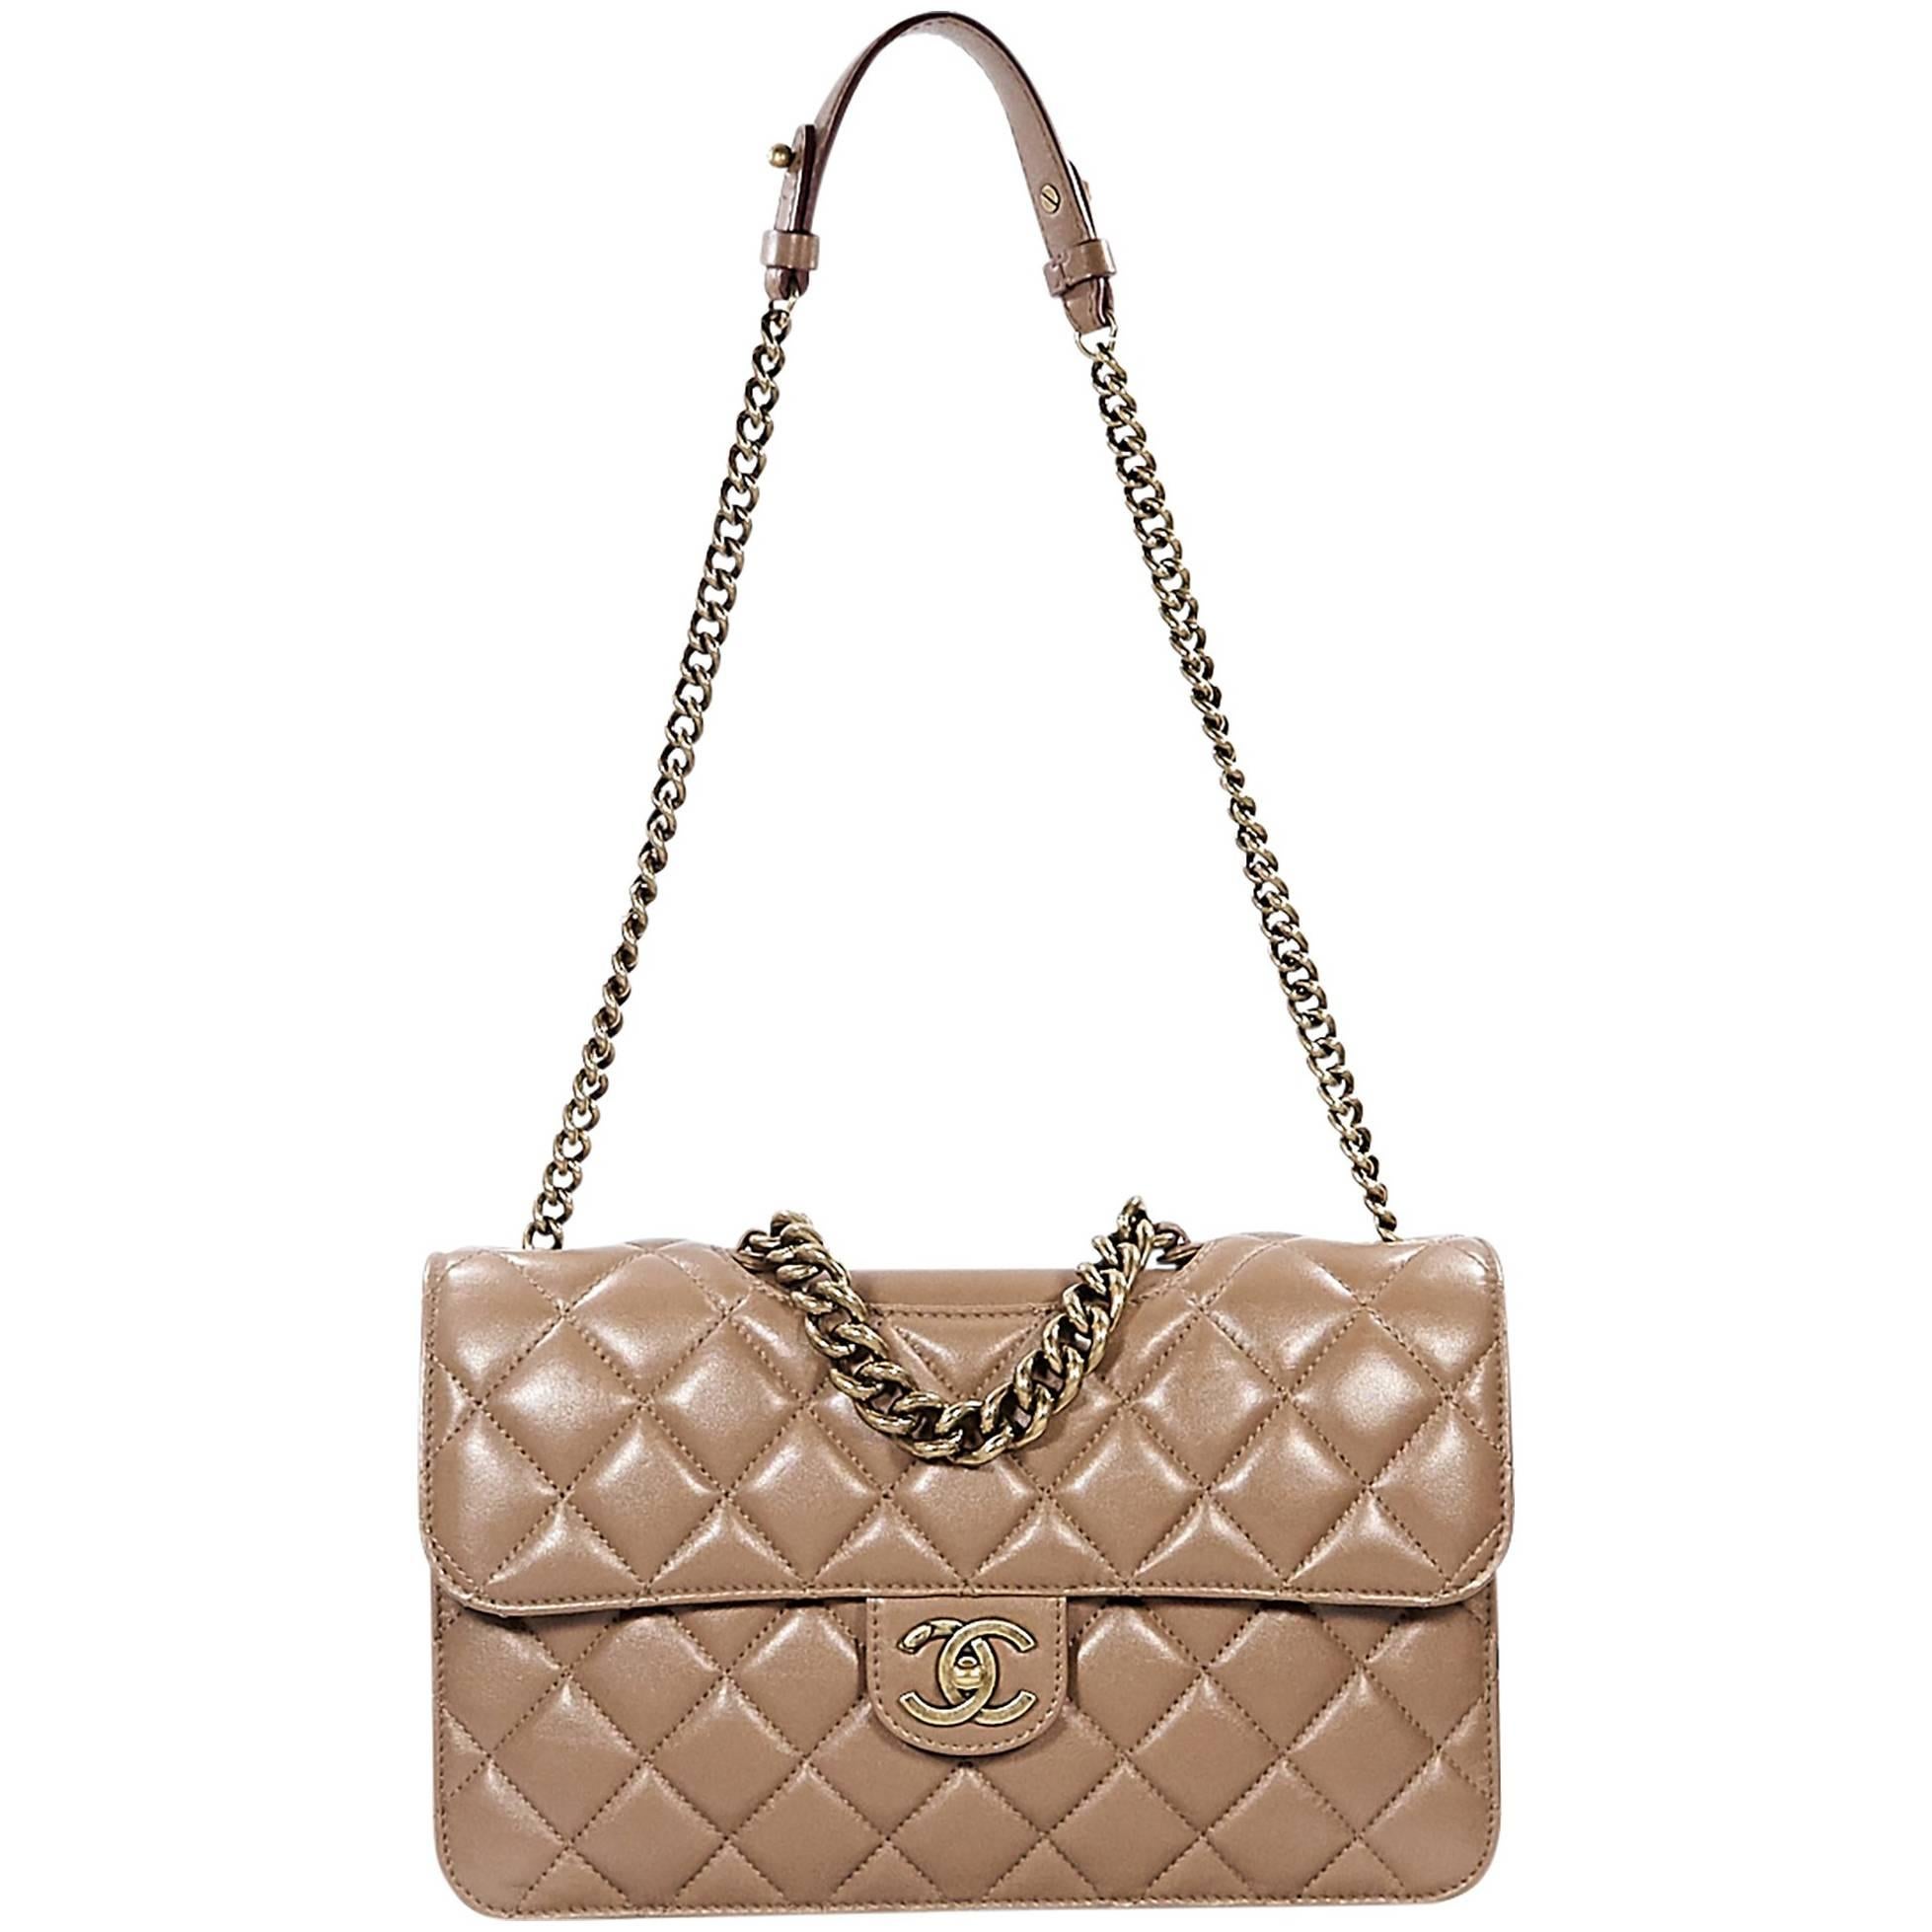 Tan Chanel Quilted Leather Flap Bag